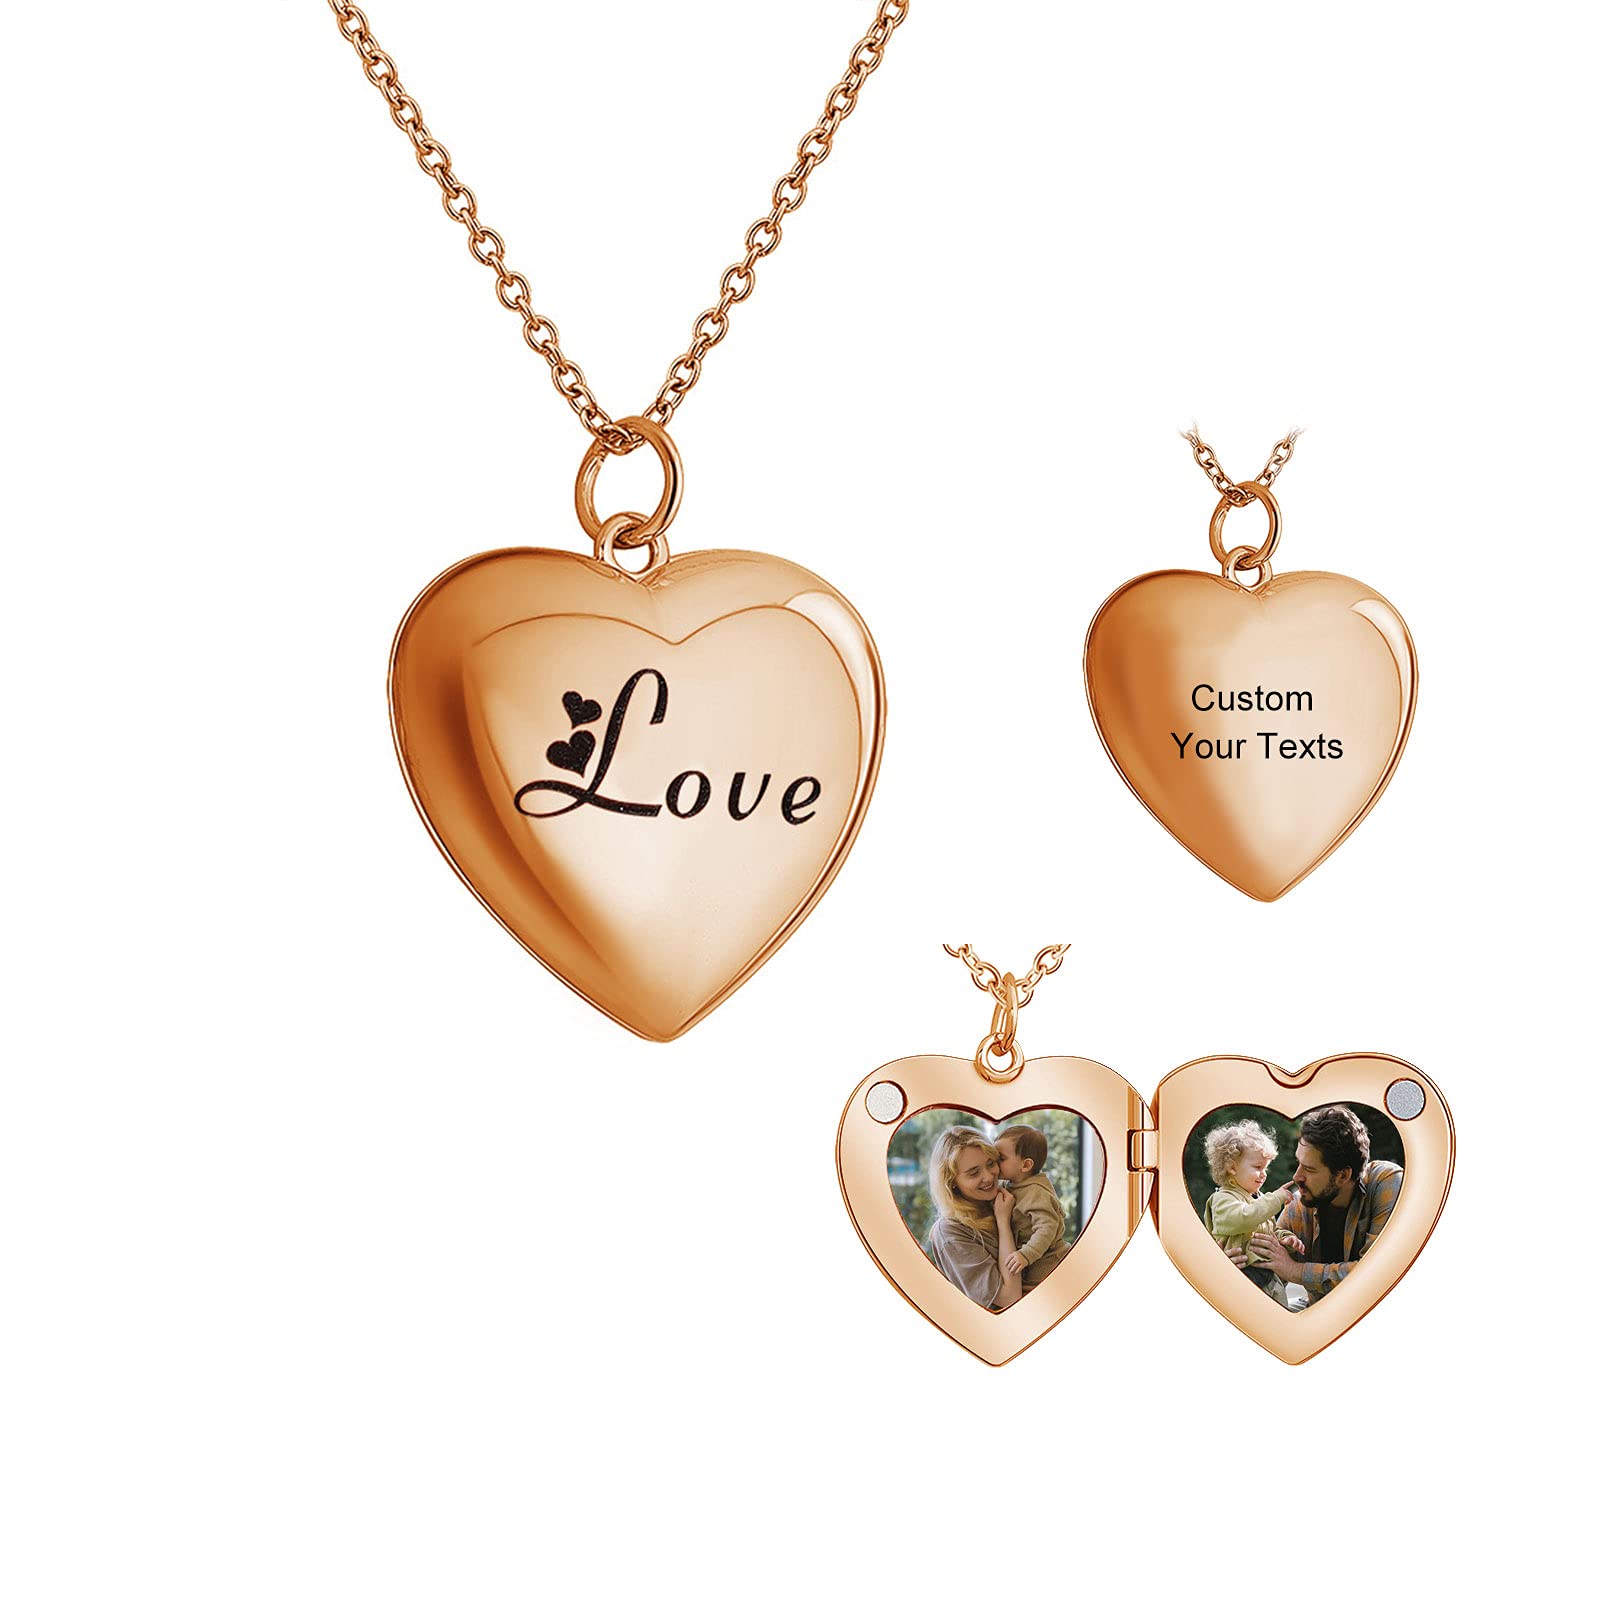 Love Heart Locket Necklace that Holds 2 Photos-YITUB